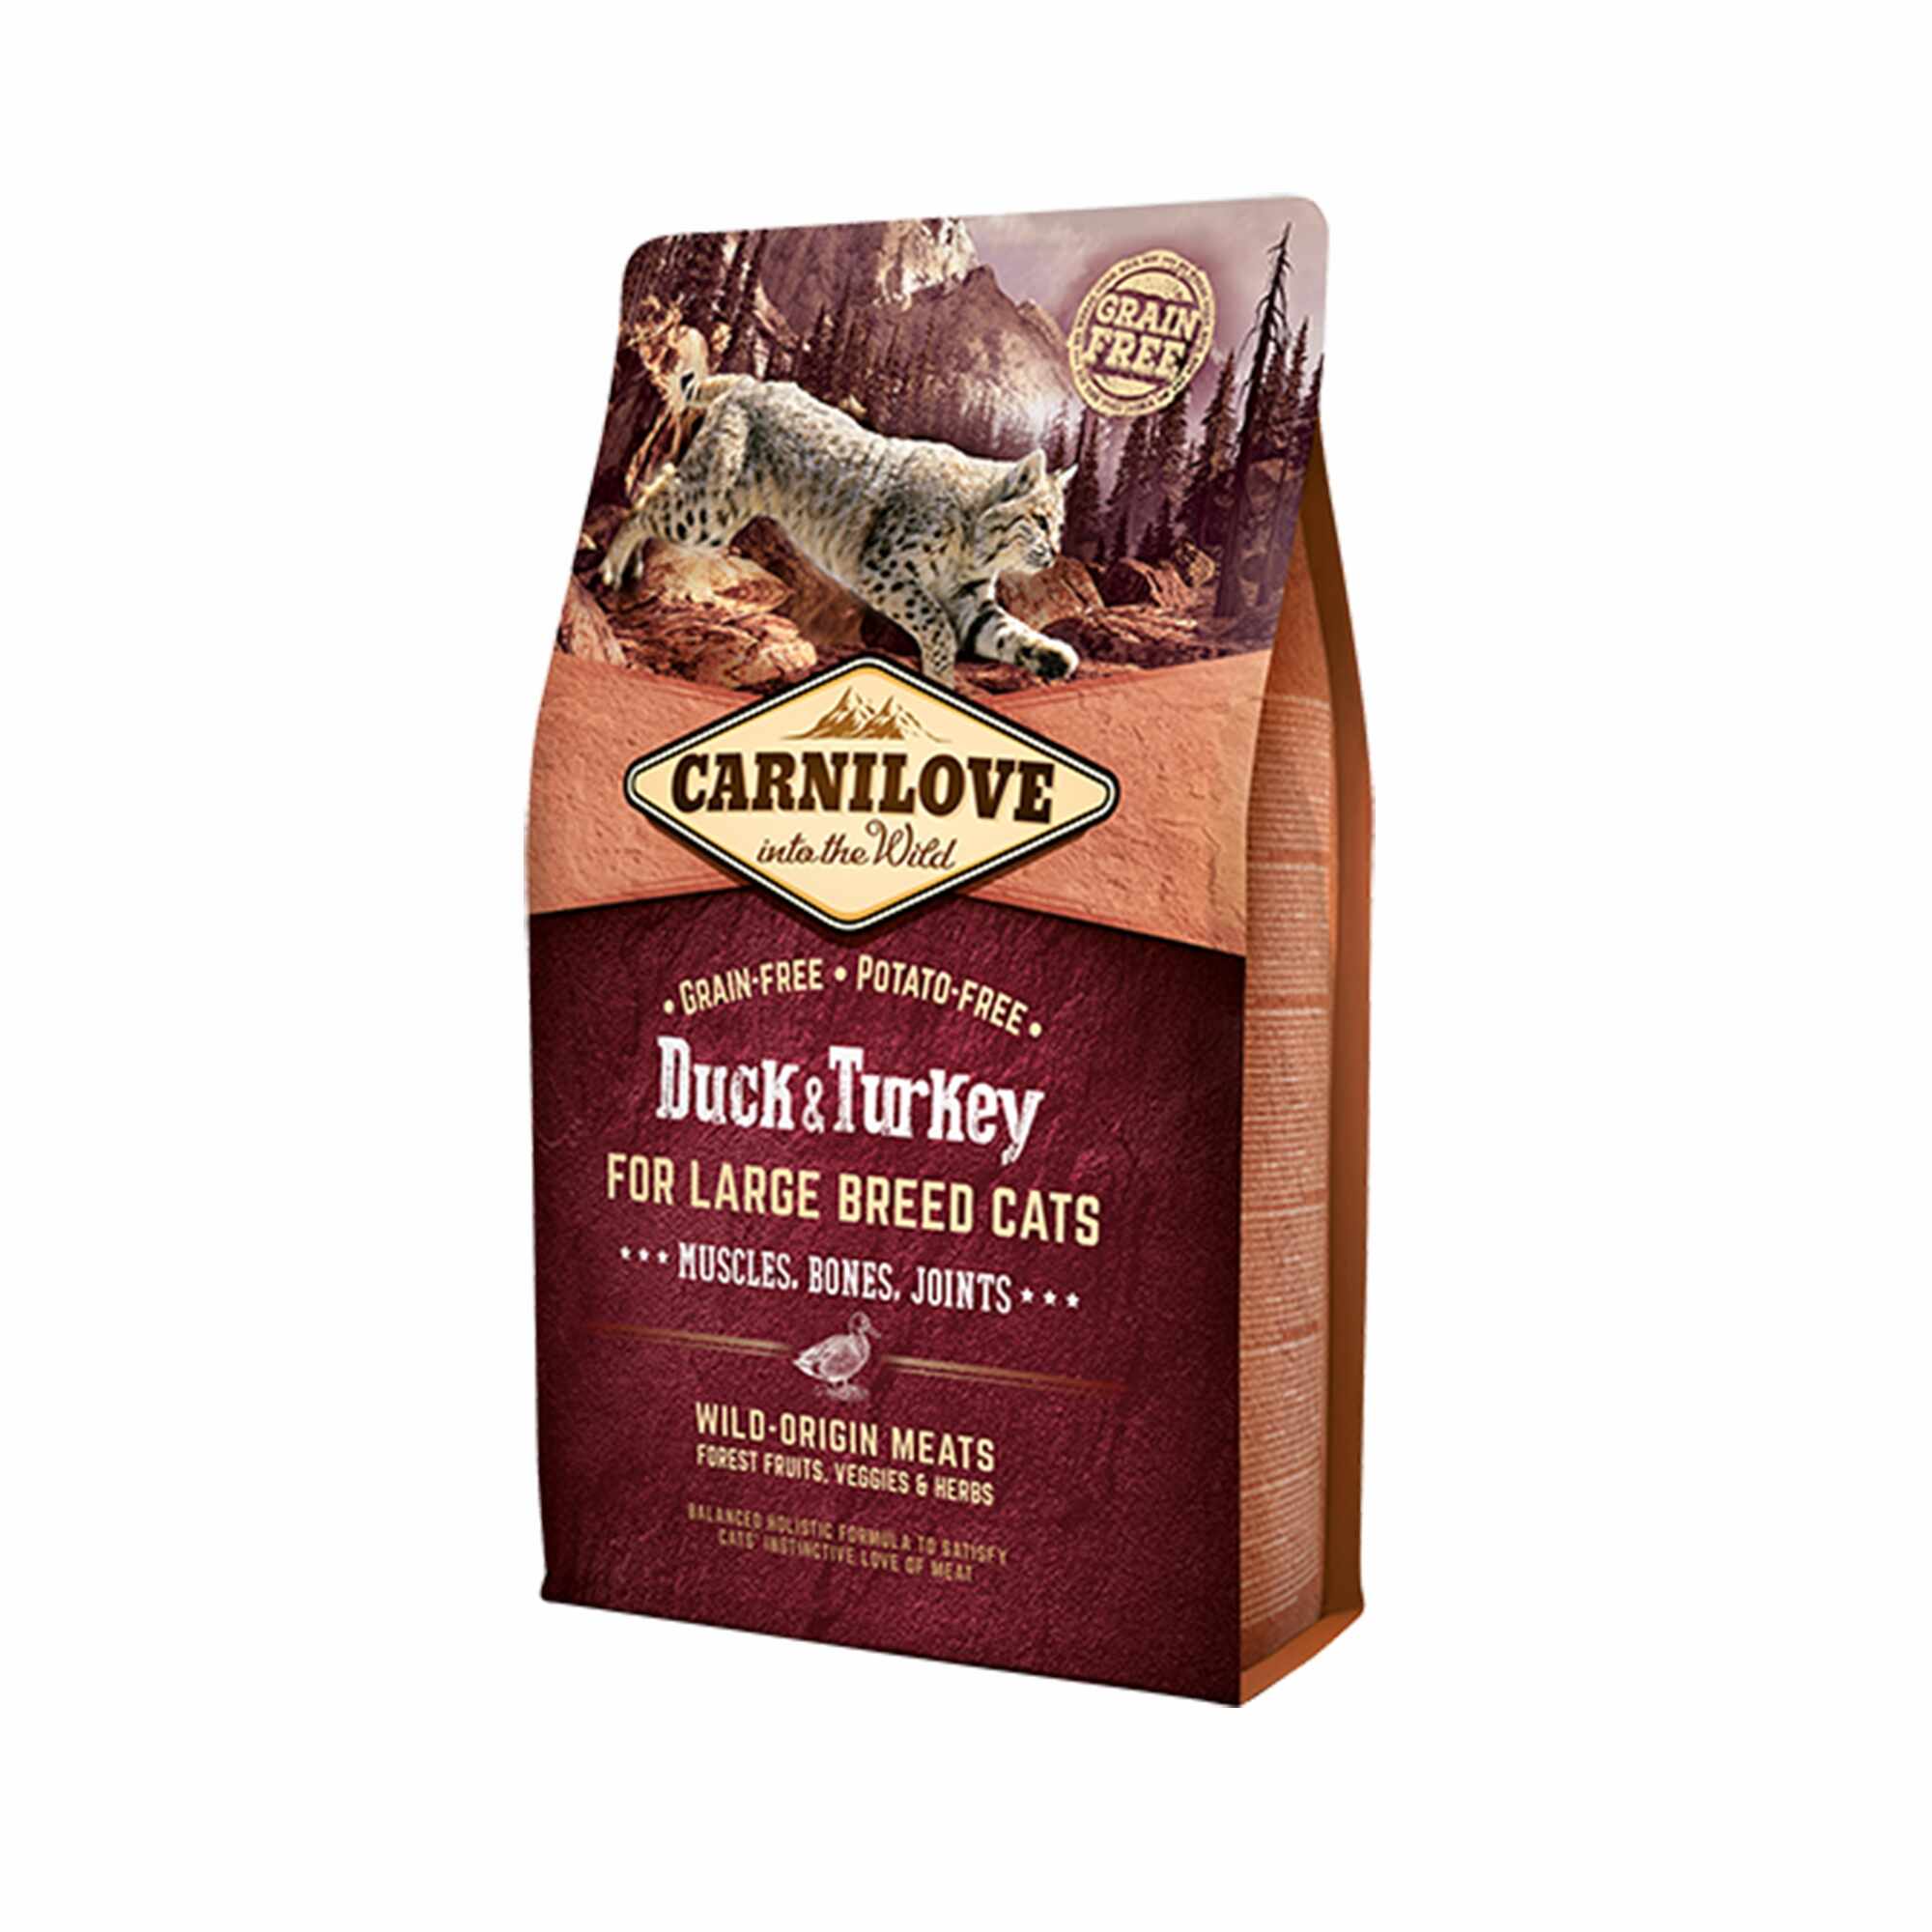 Carnilove Duck & Turkey Large Breed Cats, 2 kg